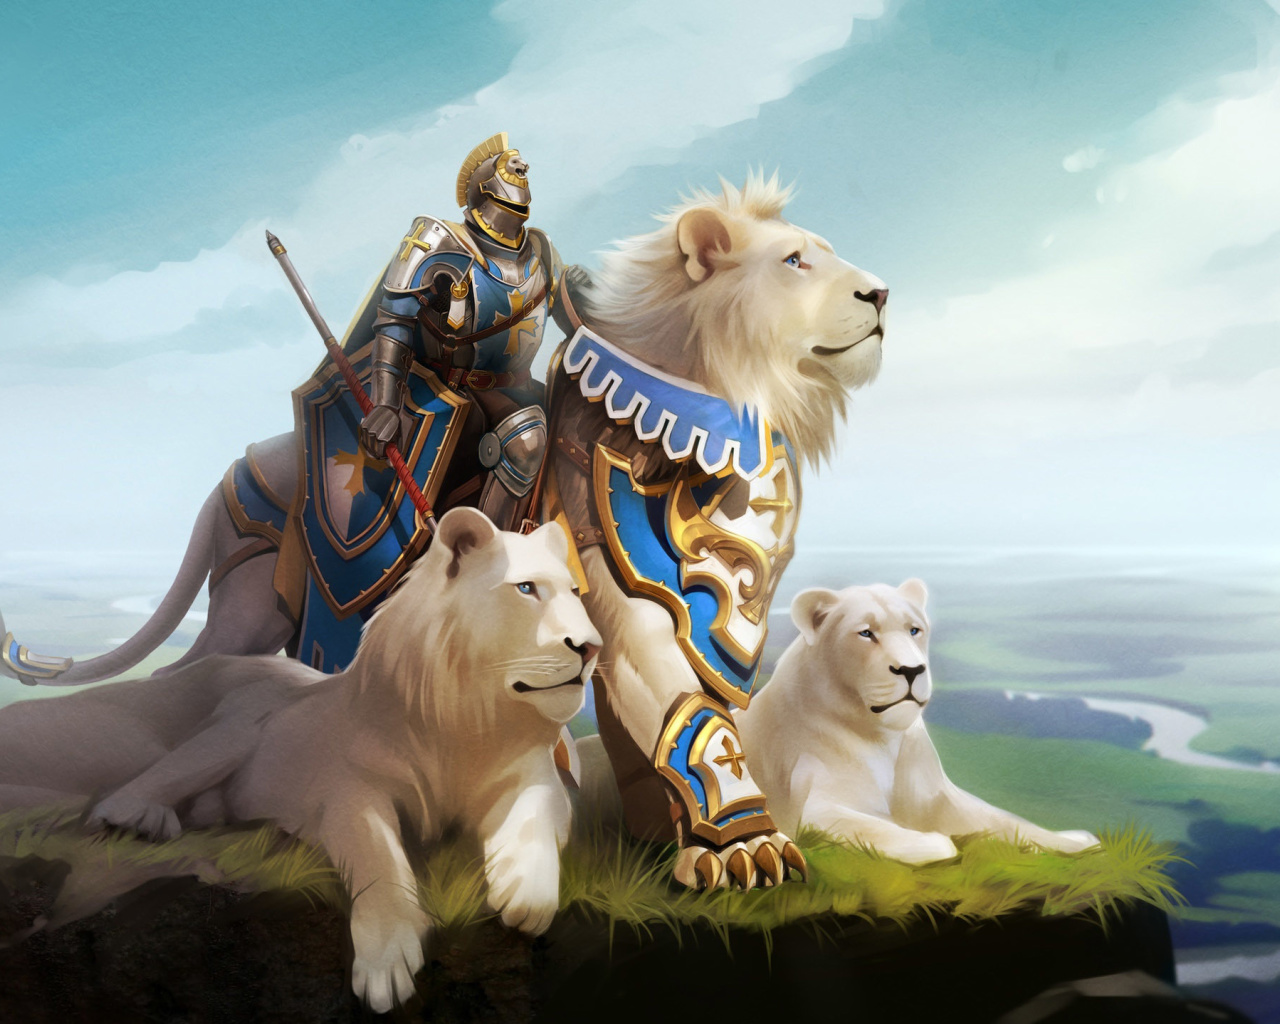 Das Knight with Lions Wallpaper 1280x1024